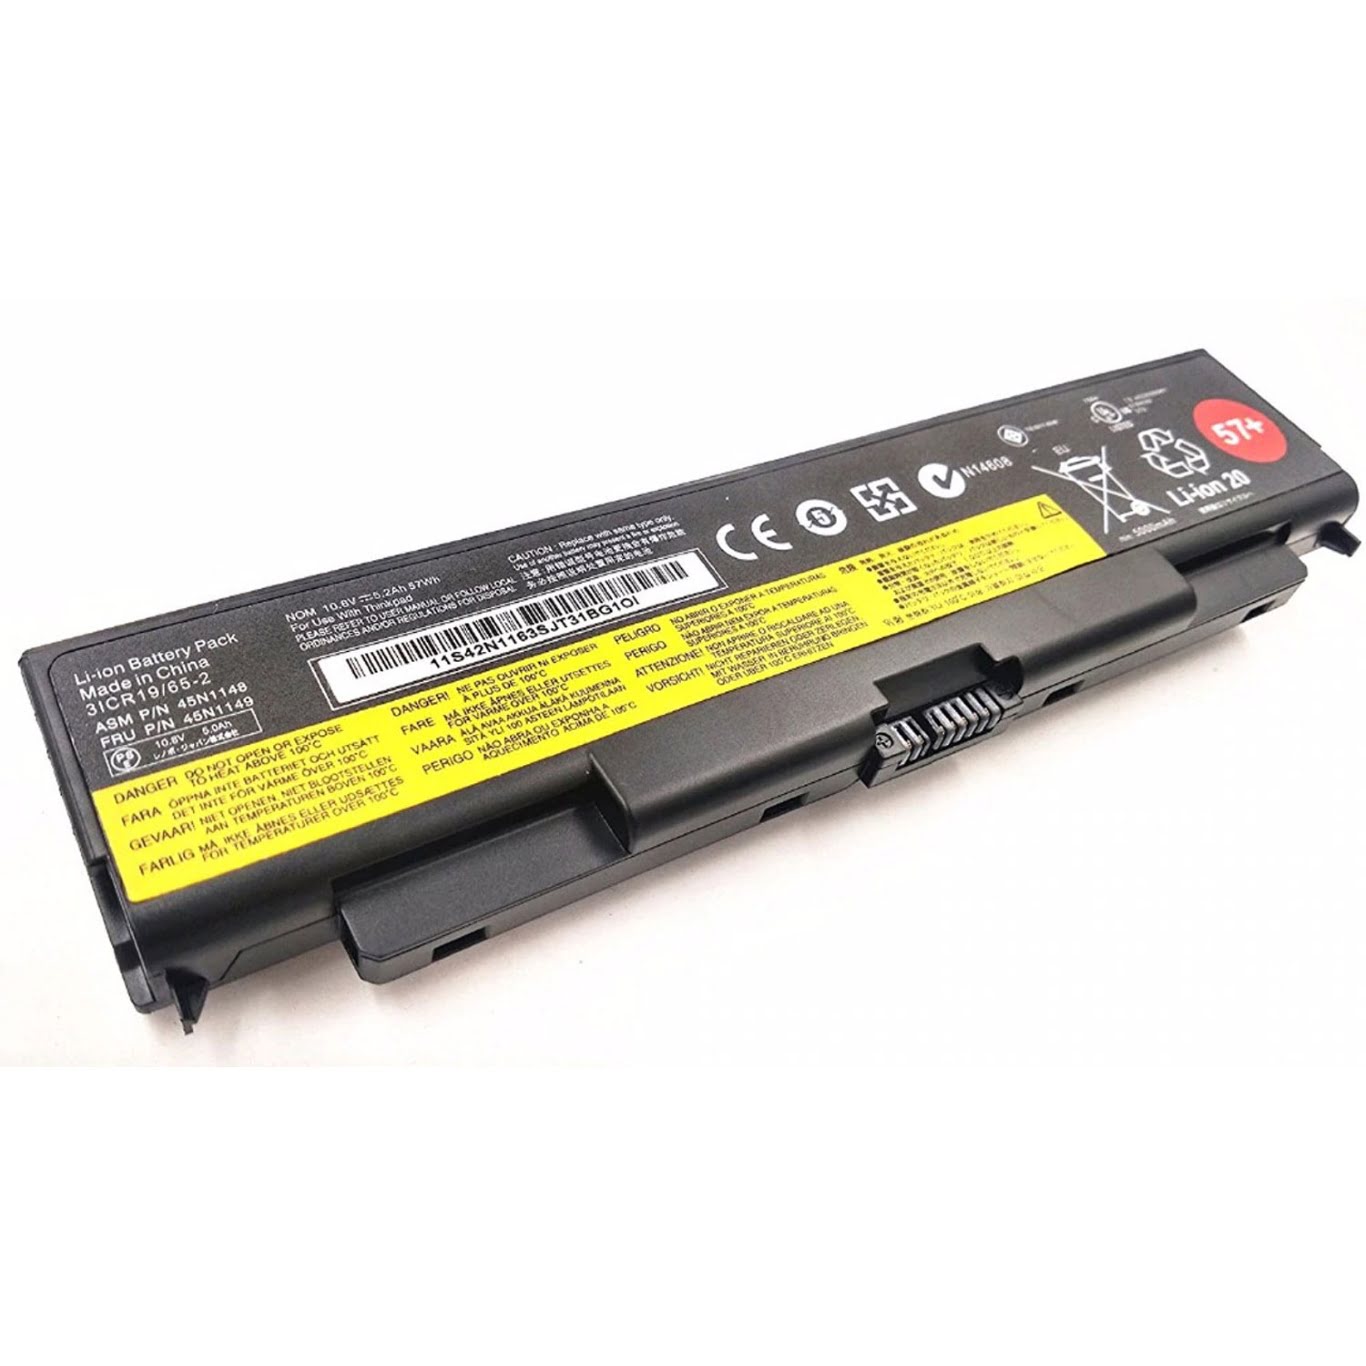 45N1144, 45N1145 replacement Laptop Battery for Lenovo ThinkPad L440, ThinkPad L540, 6 cells, 10.8V, 57wh